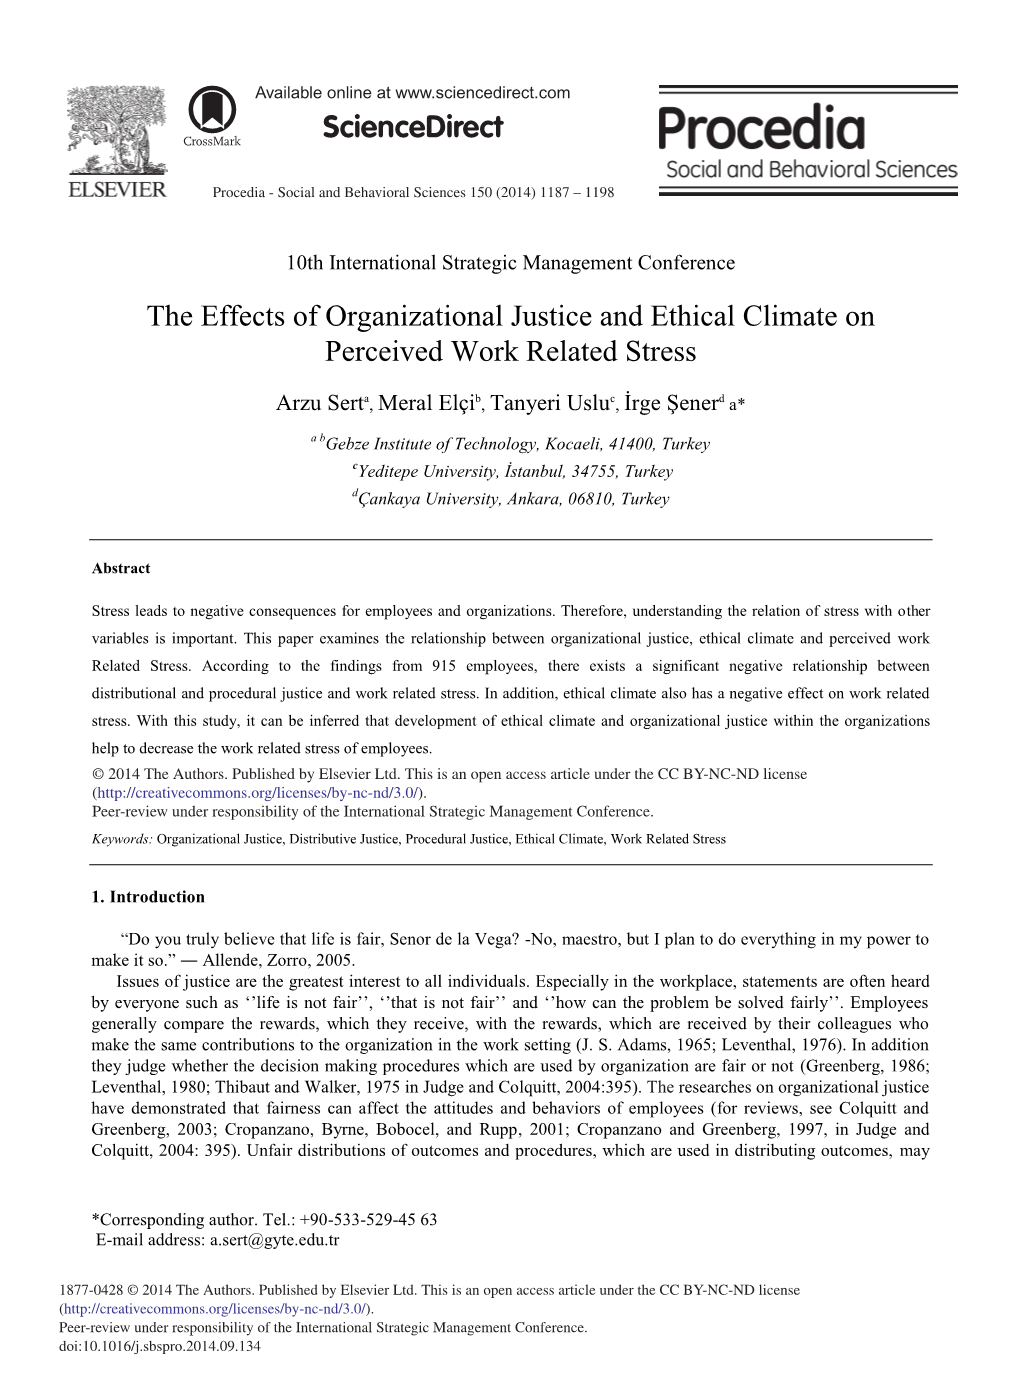 The Effects of Organizational Justice and Ethical Climate on Perceived Work Related Stress